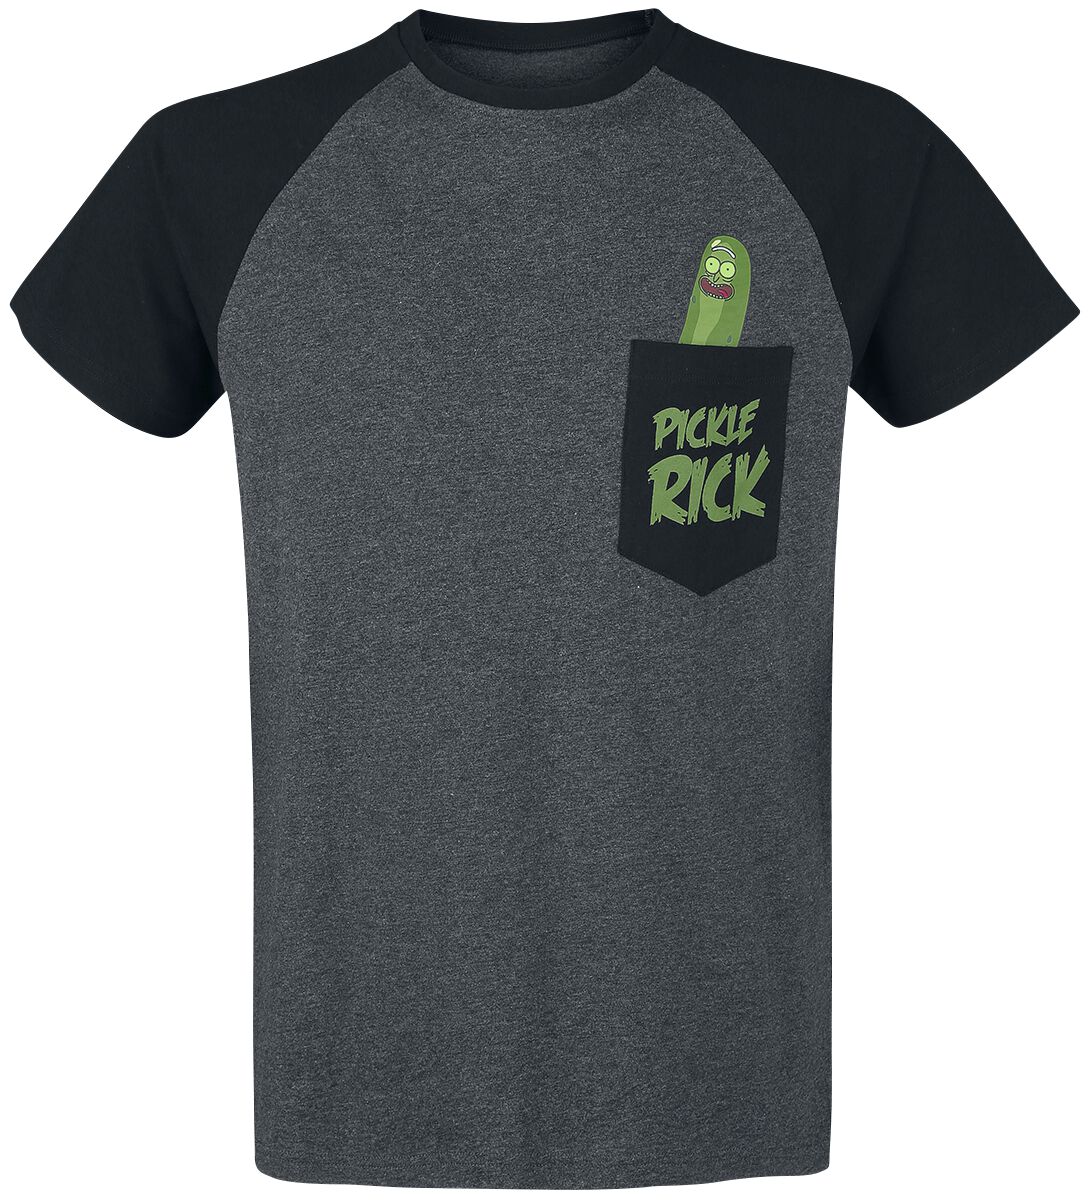 Image of Rick And Morty Pickle Rick T-Shirt grau meliert/schwarz